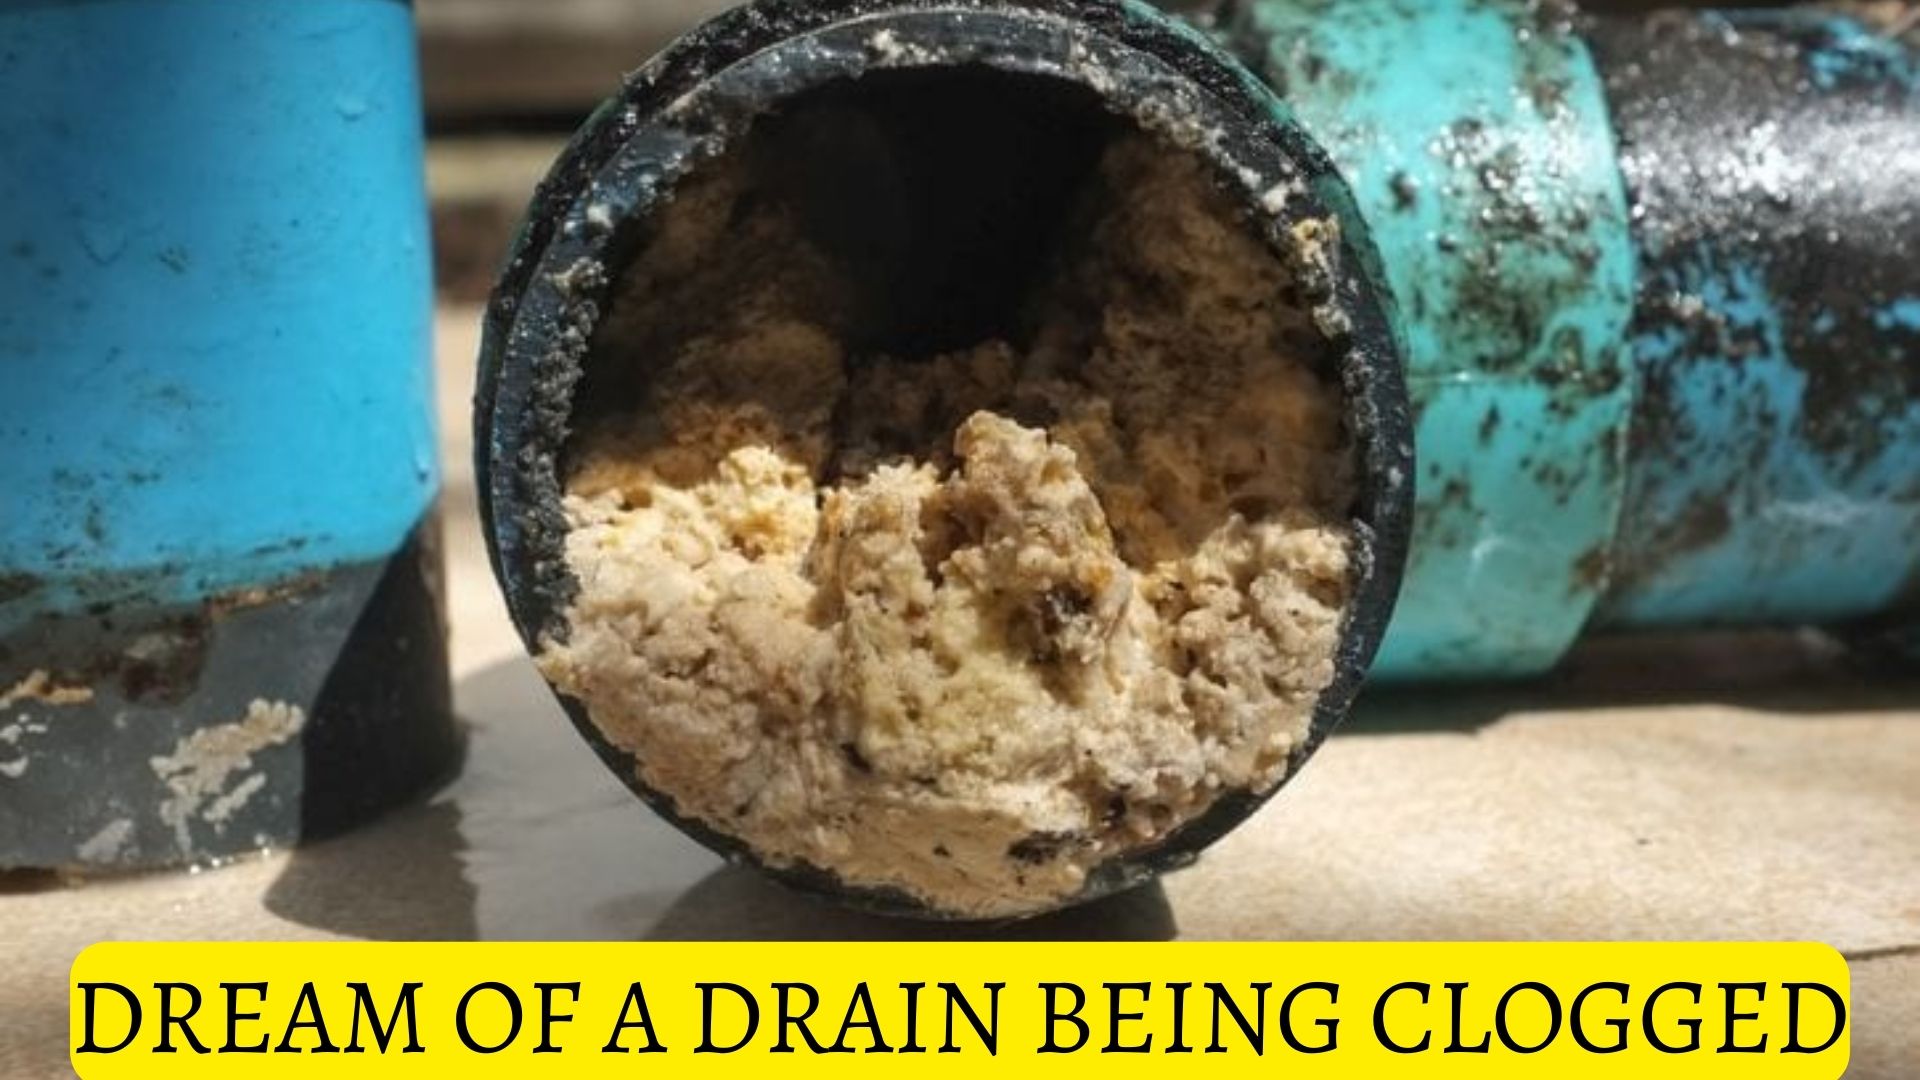 Dream Of A Drain Being Clogged - Represents A Messy Situation